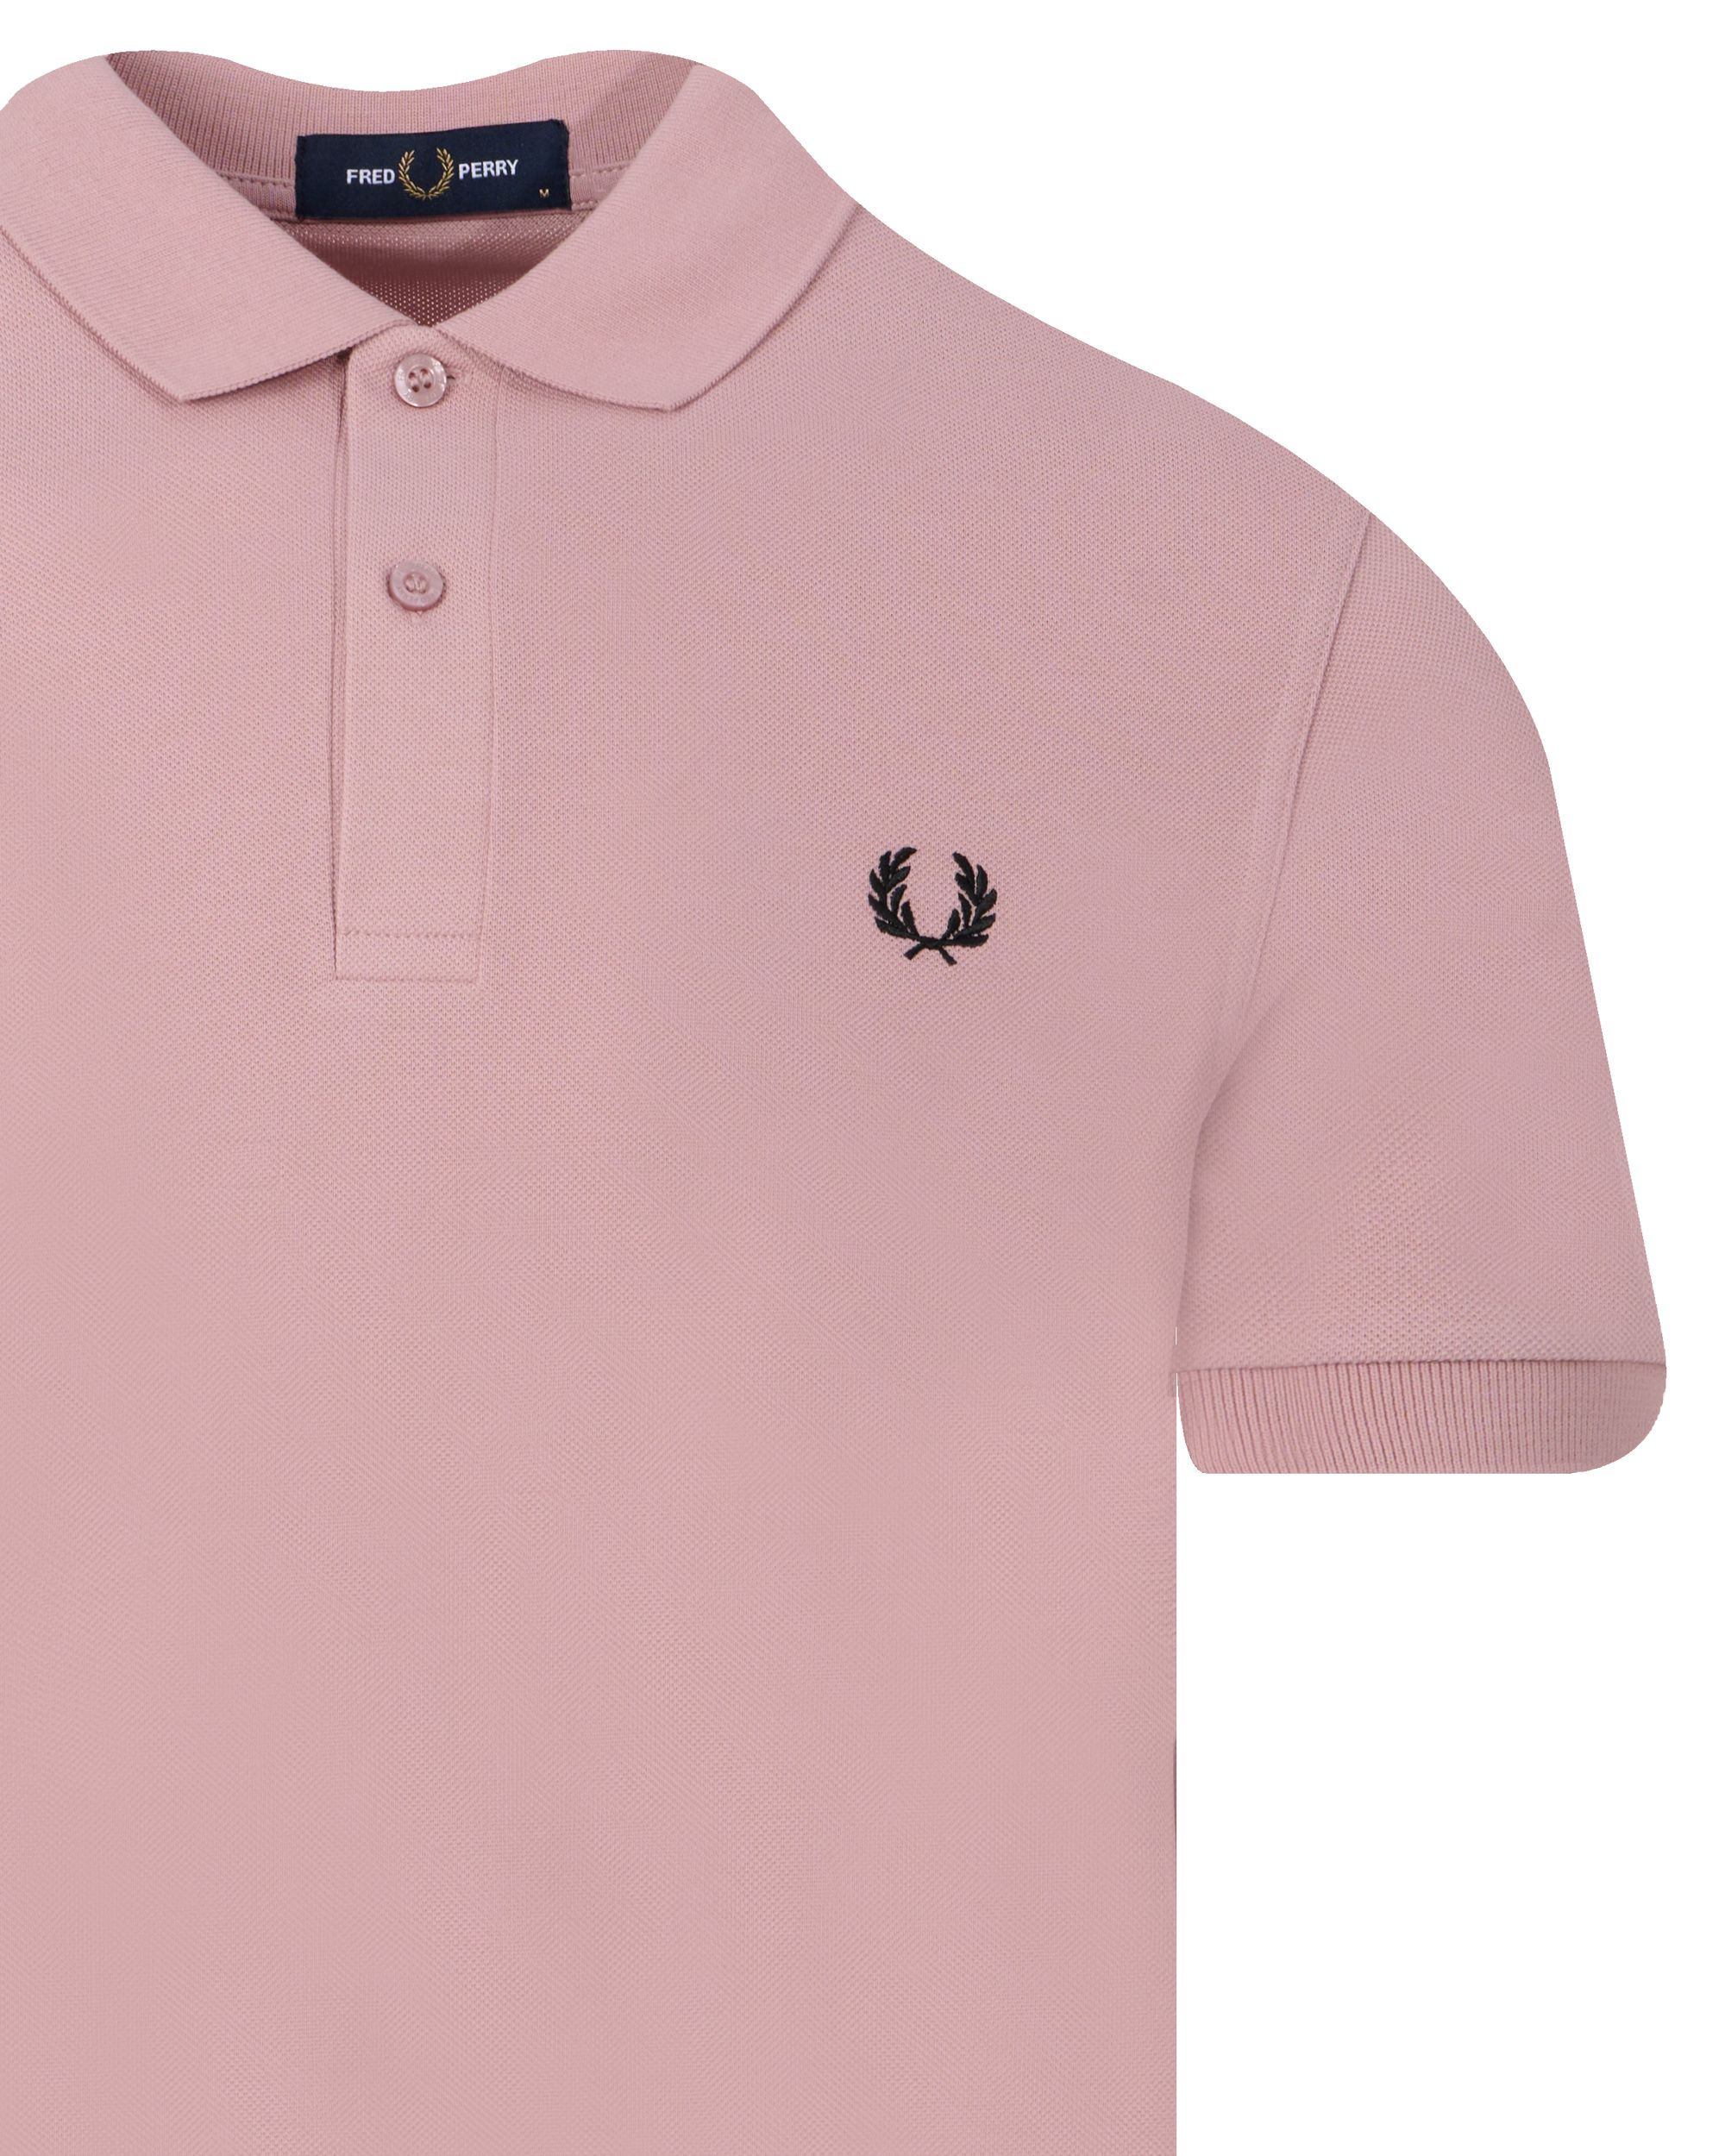 Fred Perry Polo KM Roze 095675-001-L